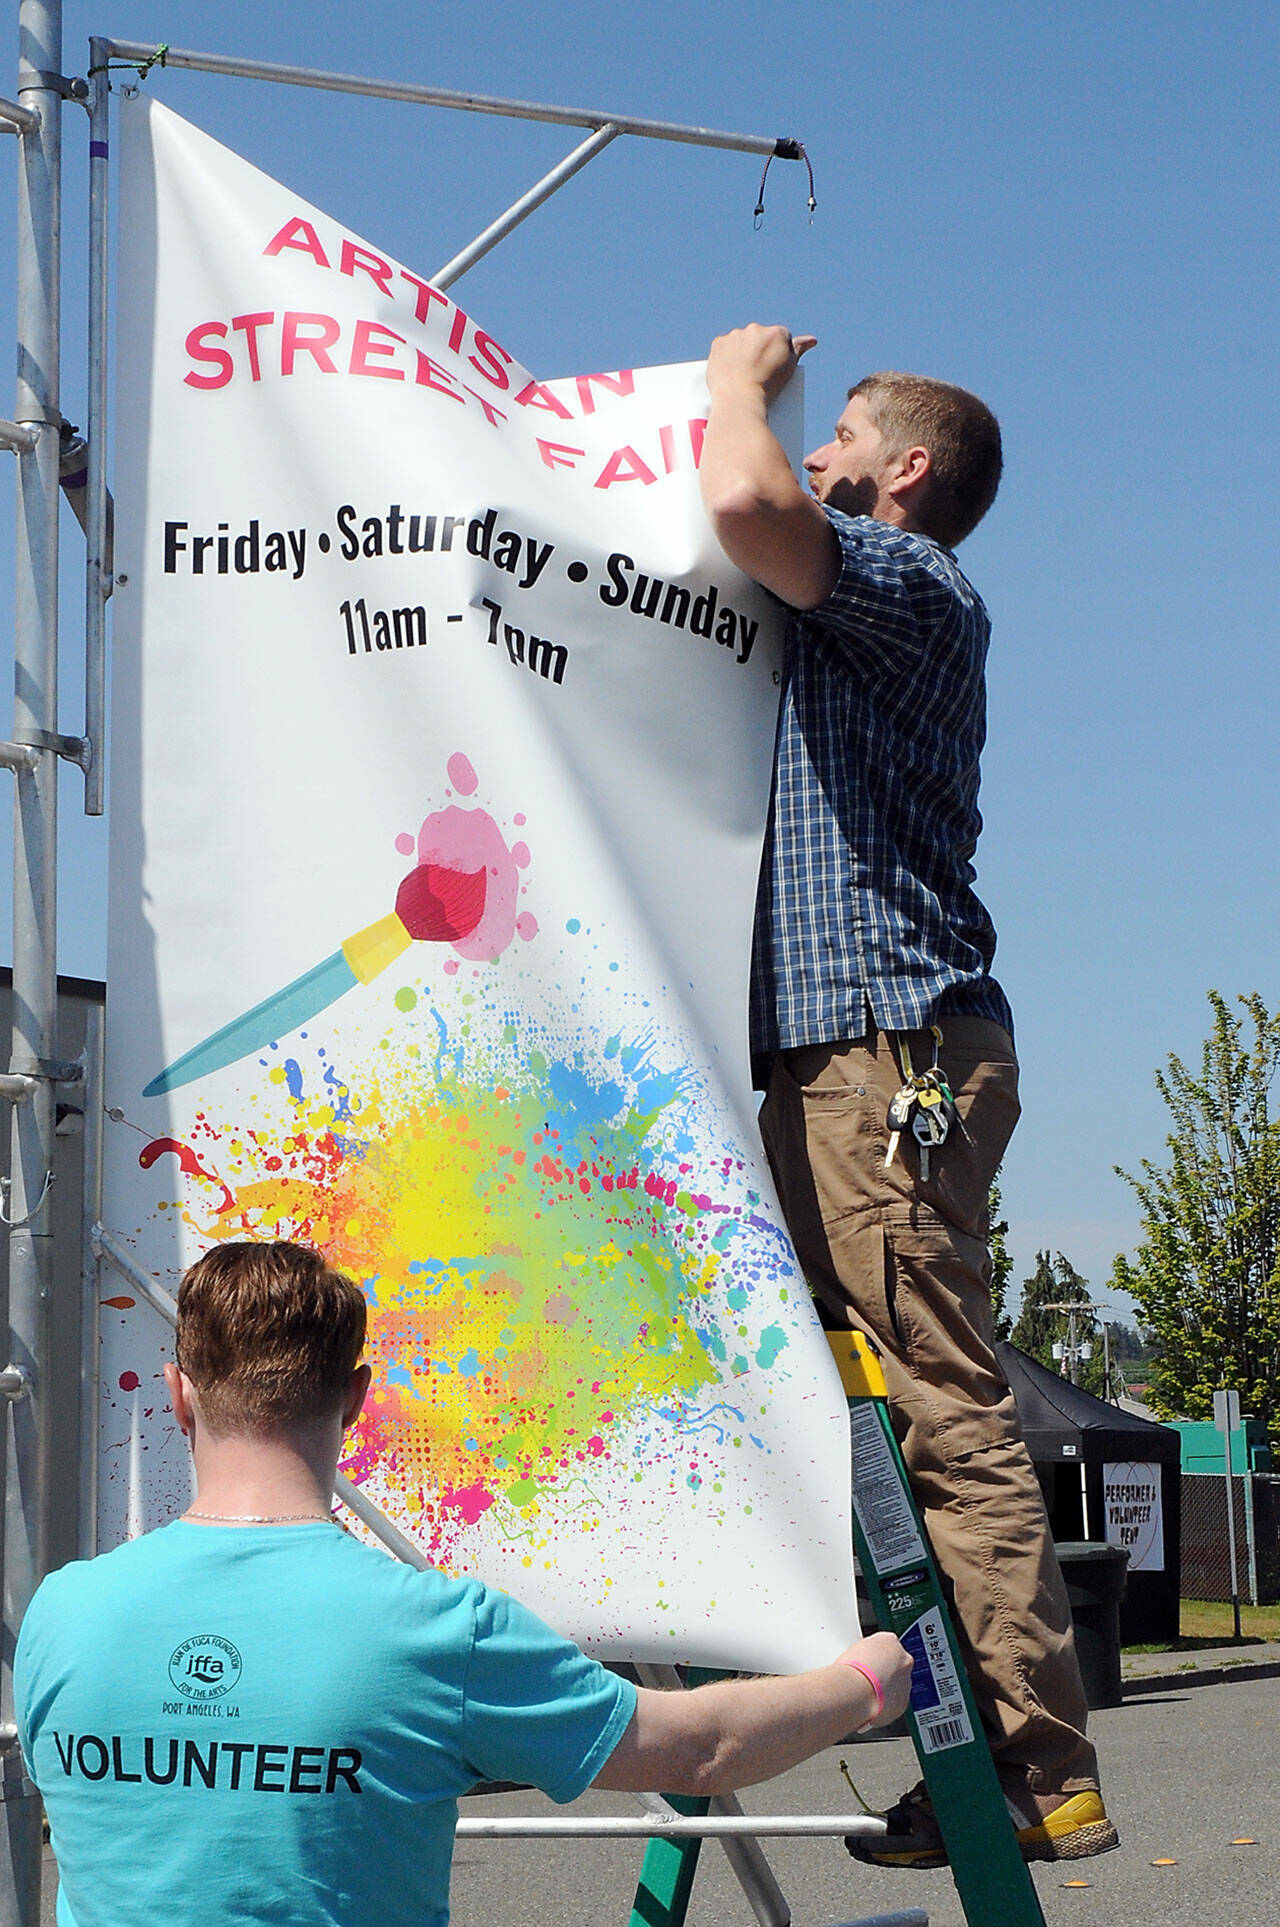 Silas Crews of Sequim, right, hoists a Juan de Fuca Festival Artisan Street Fair banner with the assistance of Morgan Martholick of Port Angeles on Friday outside of Vern Burton Community Center in Port Angeles. (KEITH THORPE/PENINSULA DAILY NEWS)